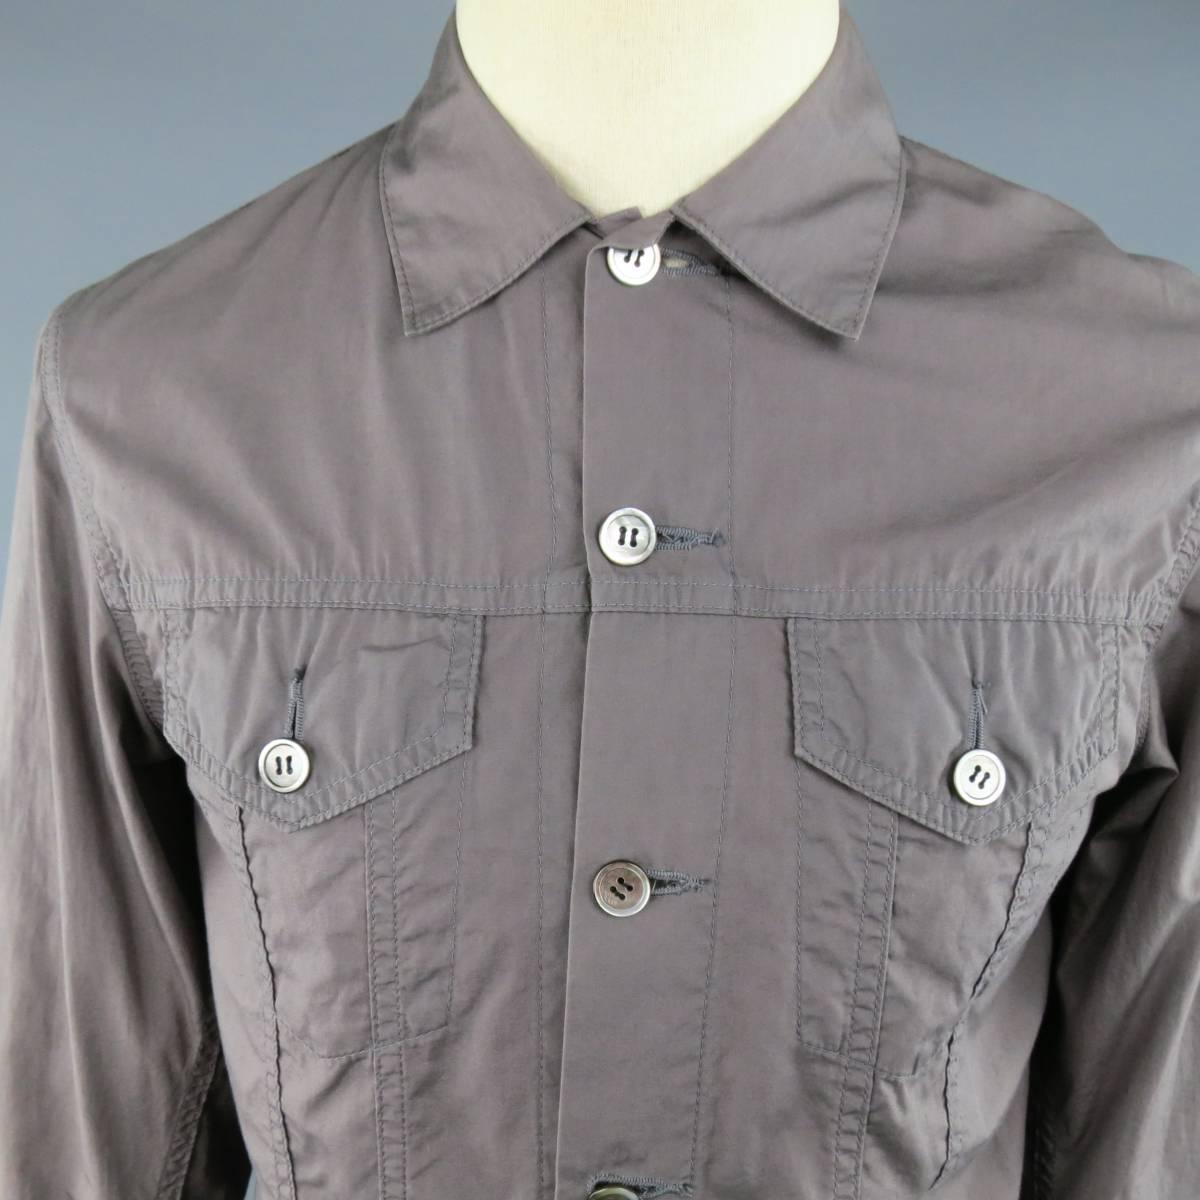 JUNYA WATANABE Jacket consists of cotton material in a taupe color tone. Designed in a button up front, chest pockets with button closure and tone-on-tone stitching throughout body. Single button cuffs and adjustable waist tabs. Made in Japan. Circa